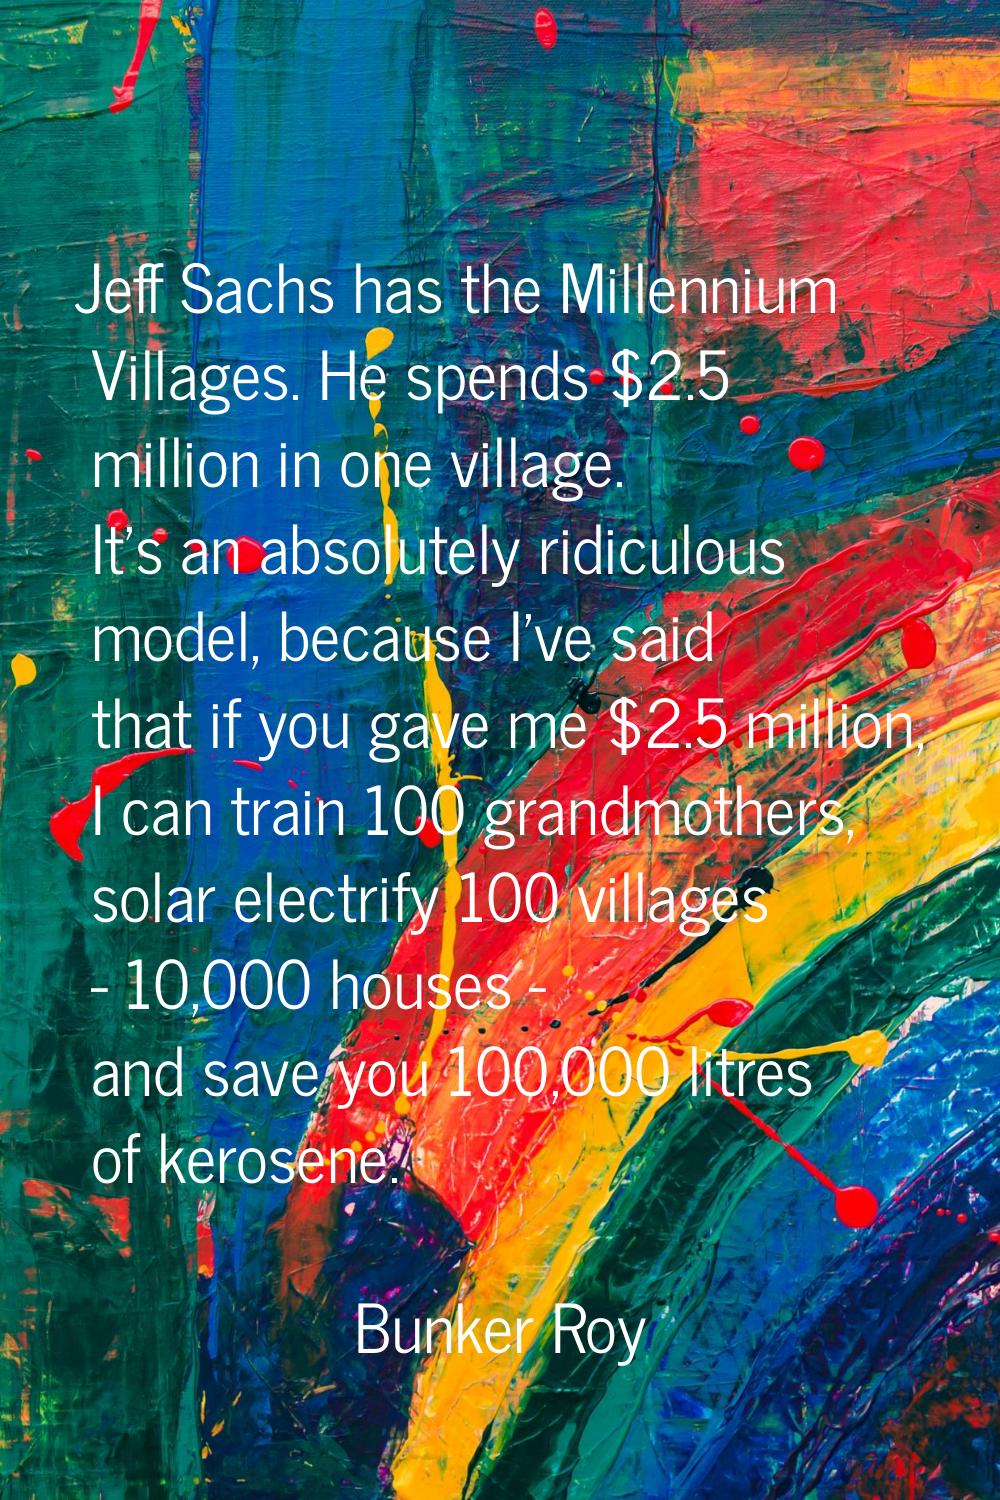 Jeff Sachs has the Millennium Villages. He spends $2.5 million in one village. It's an absolutely r